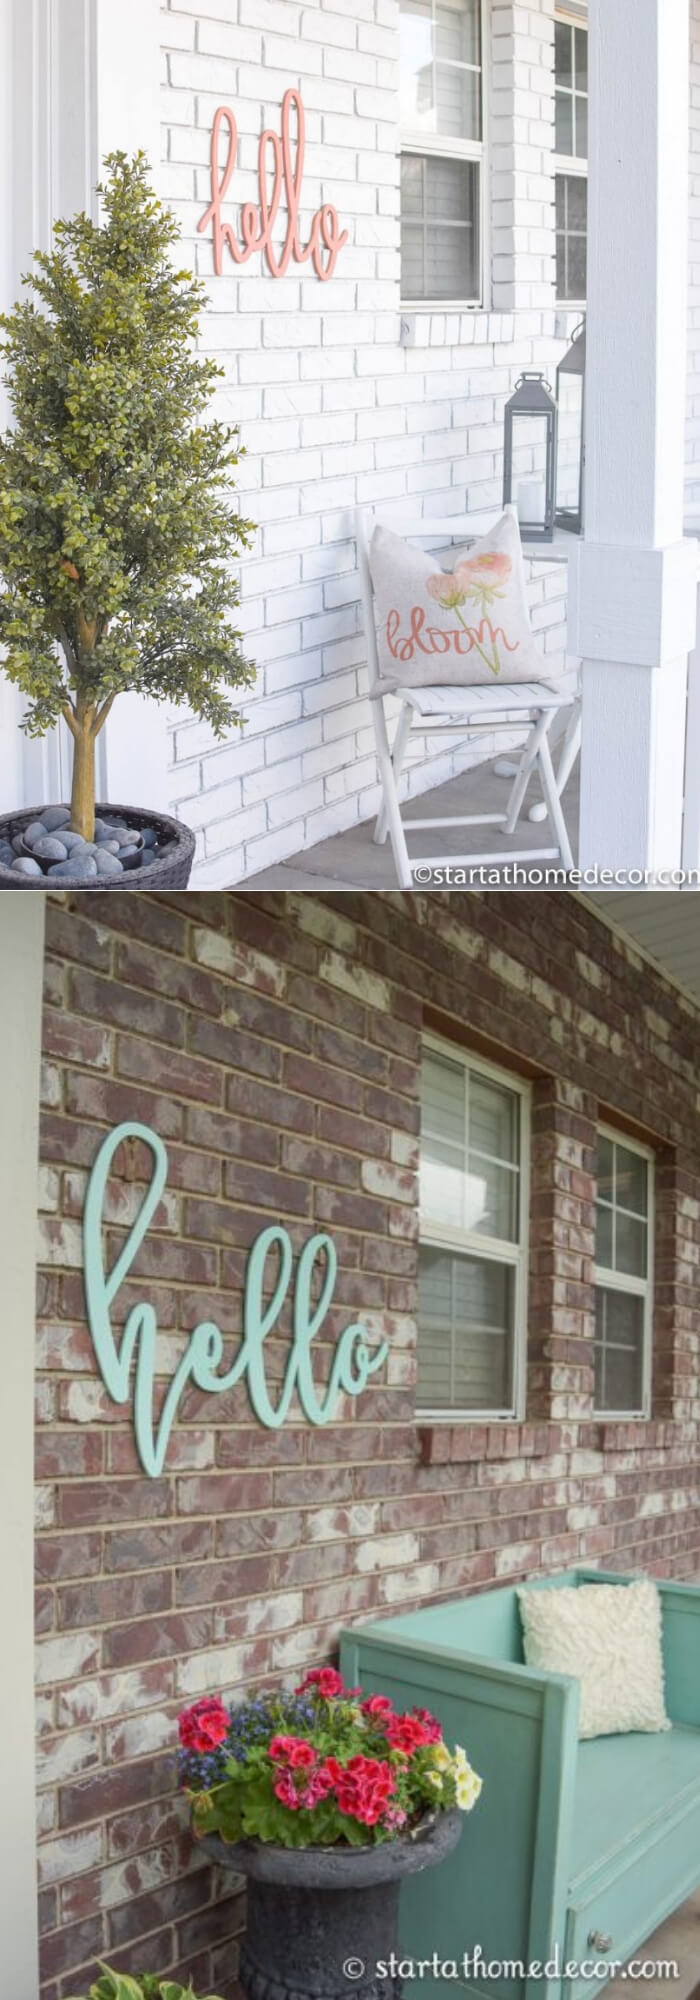 The wall with hello sign | Best Outdoor Wall Decor Ideas